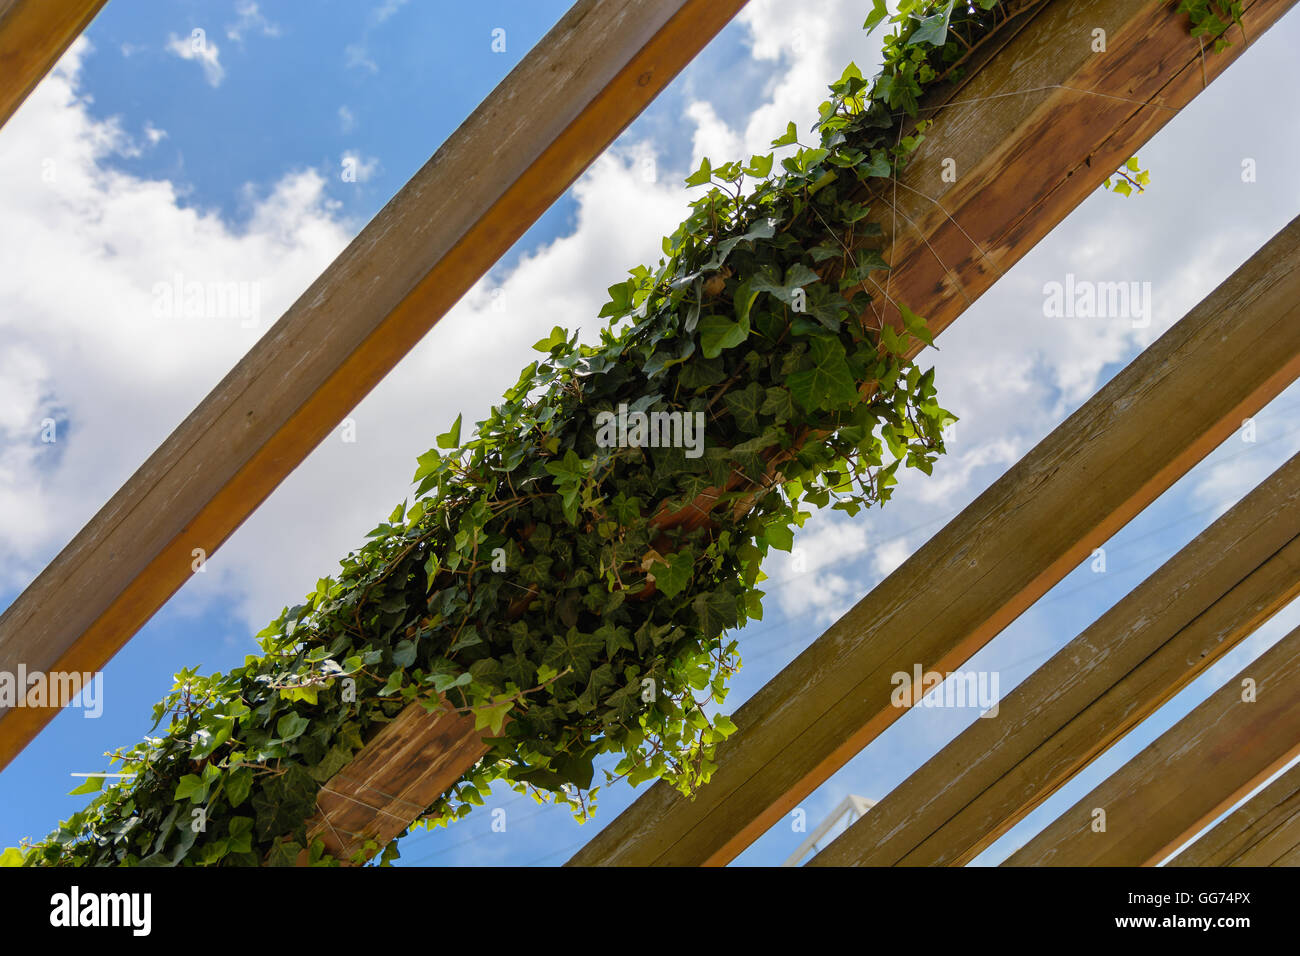 Ivy climbs the sloping wooden beams on the background of blue sky Stock Photo